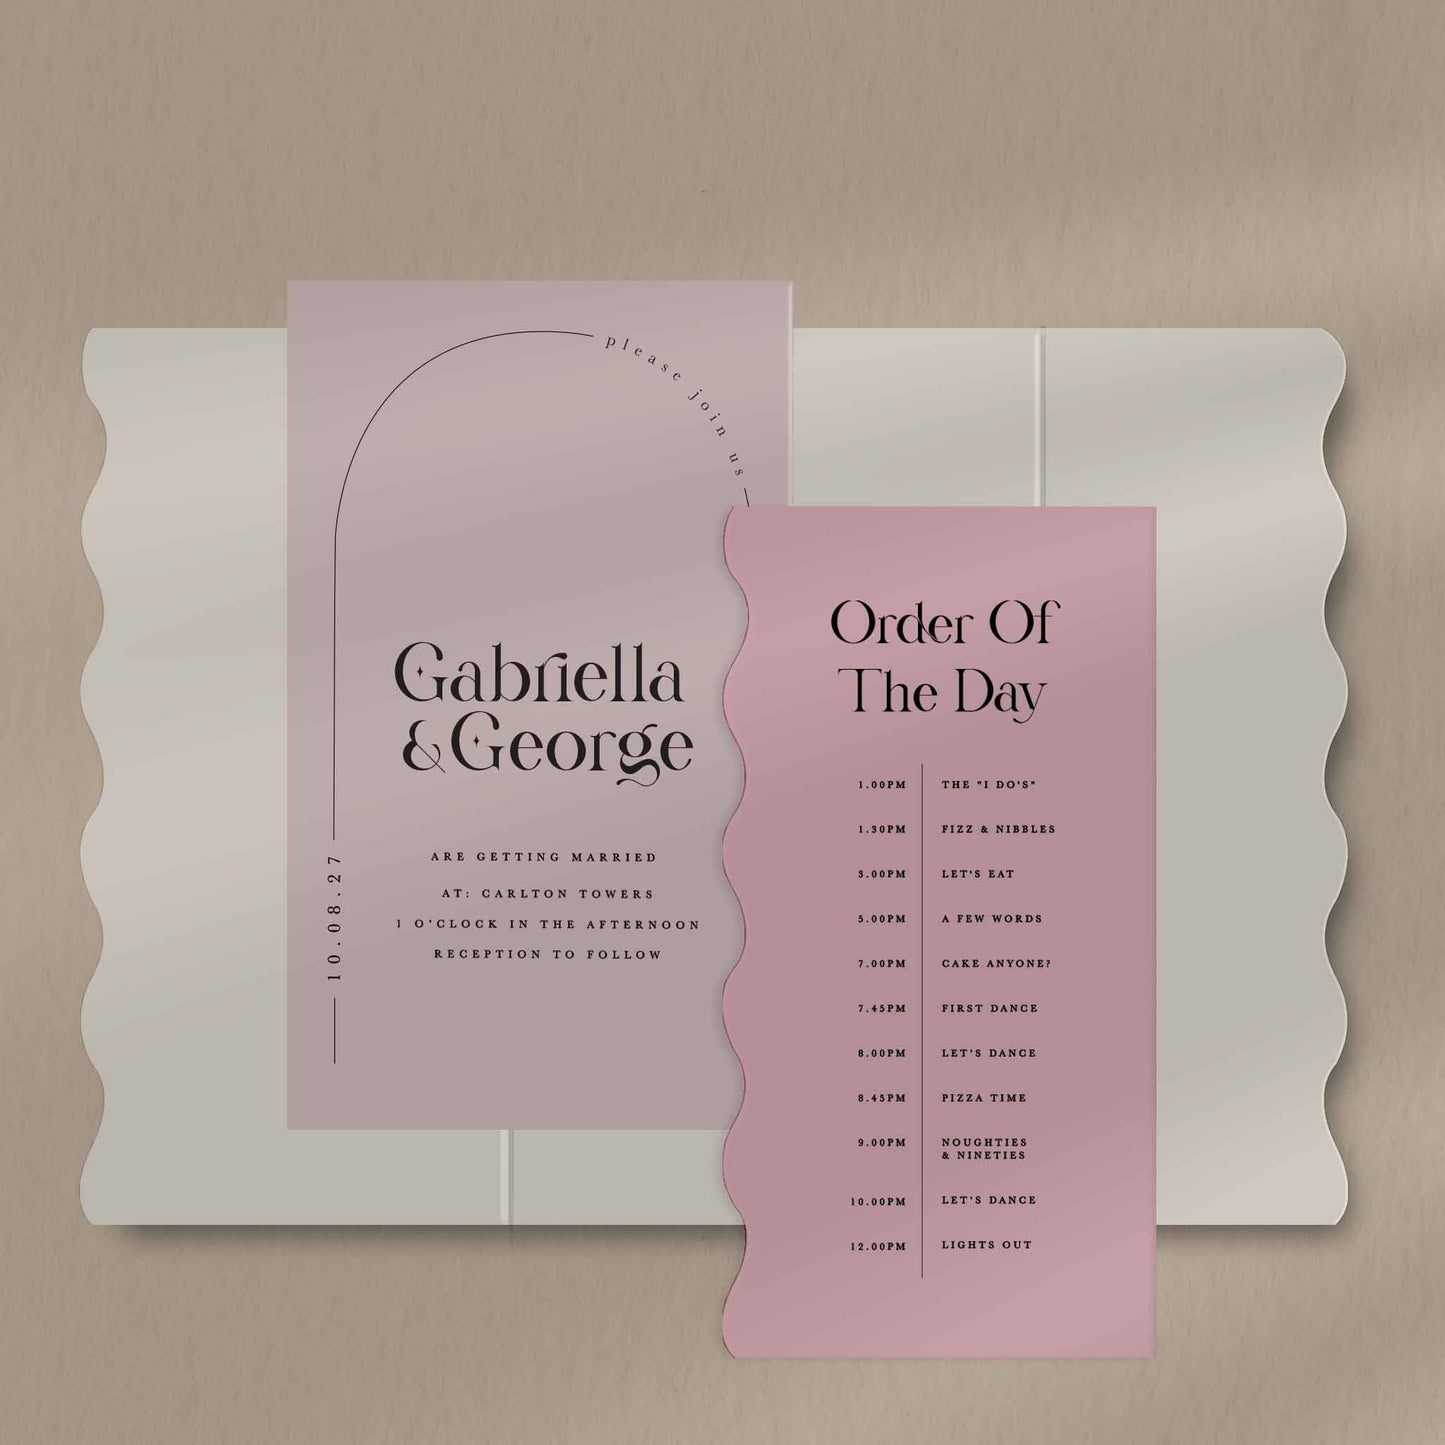 Scallop Envelope Sample  Ivy and Gold Wedding Stationery Gabriella  